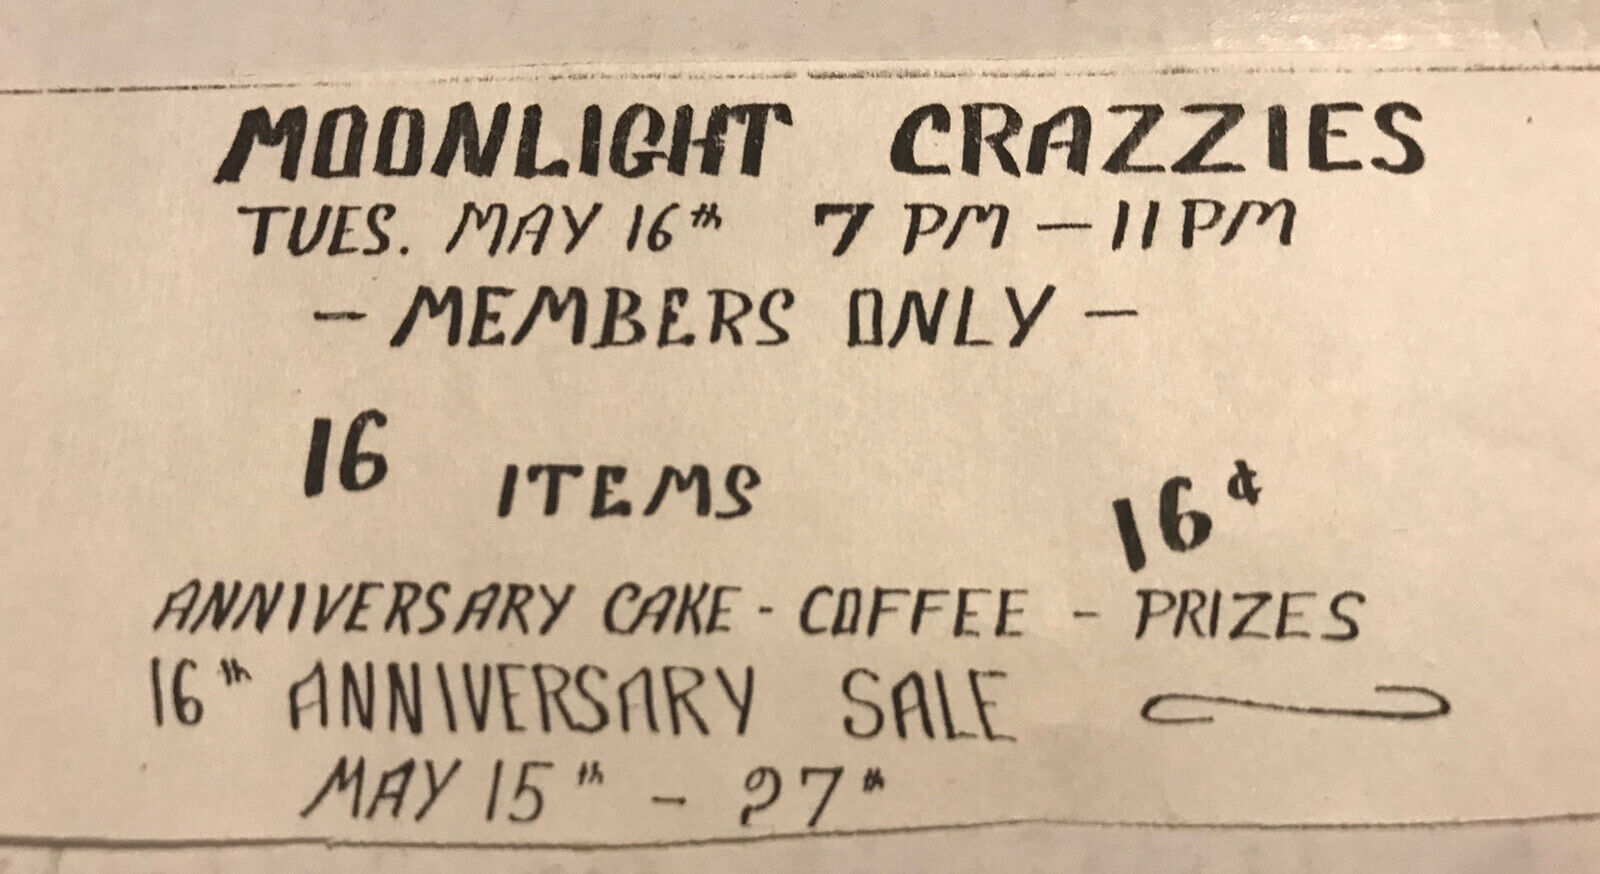 Moonlight Crazzies Ticket 16th Anniversary Sale Members Only 16 Items 16 Cents.